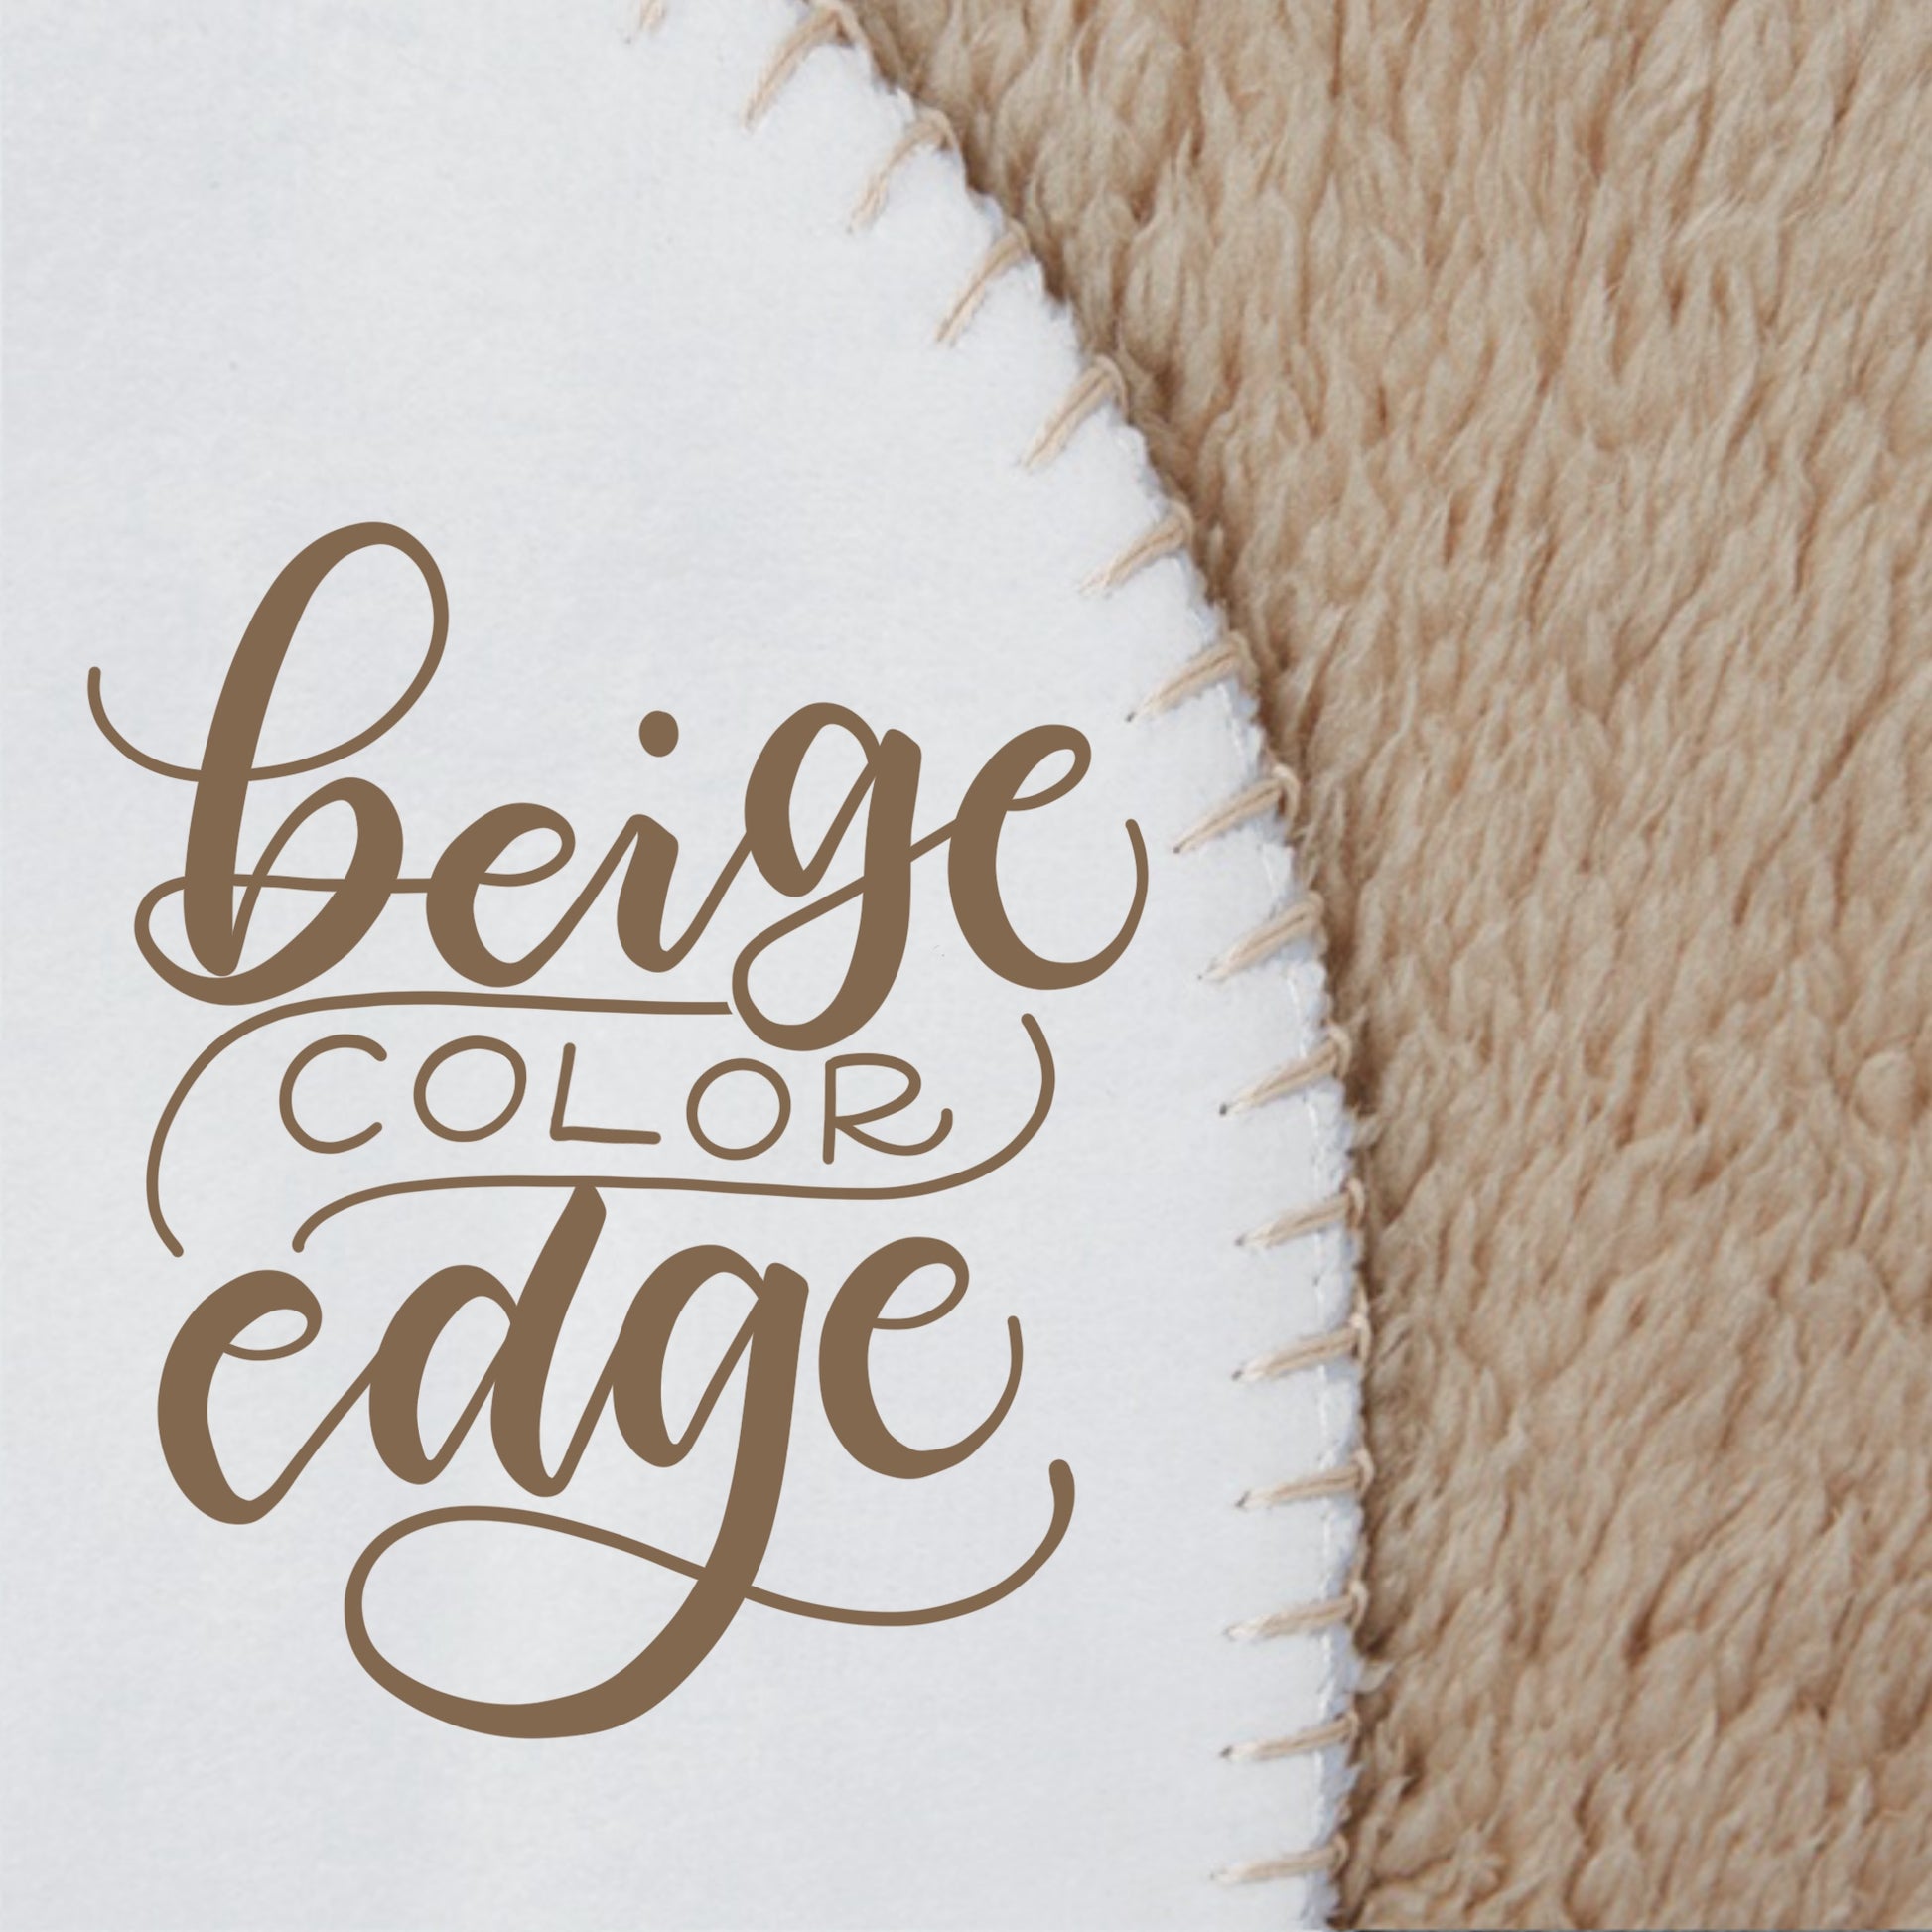 a close up of a piece of paper with the words beige color edge